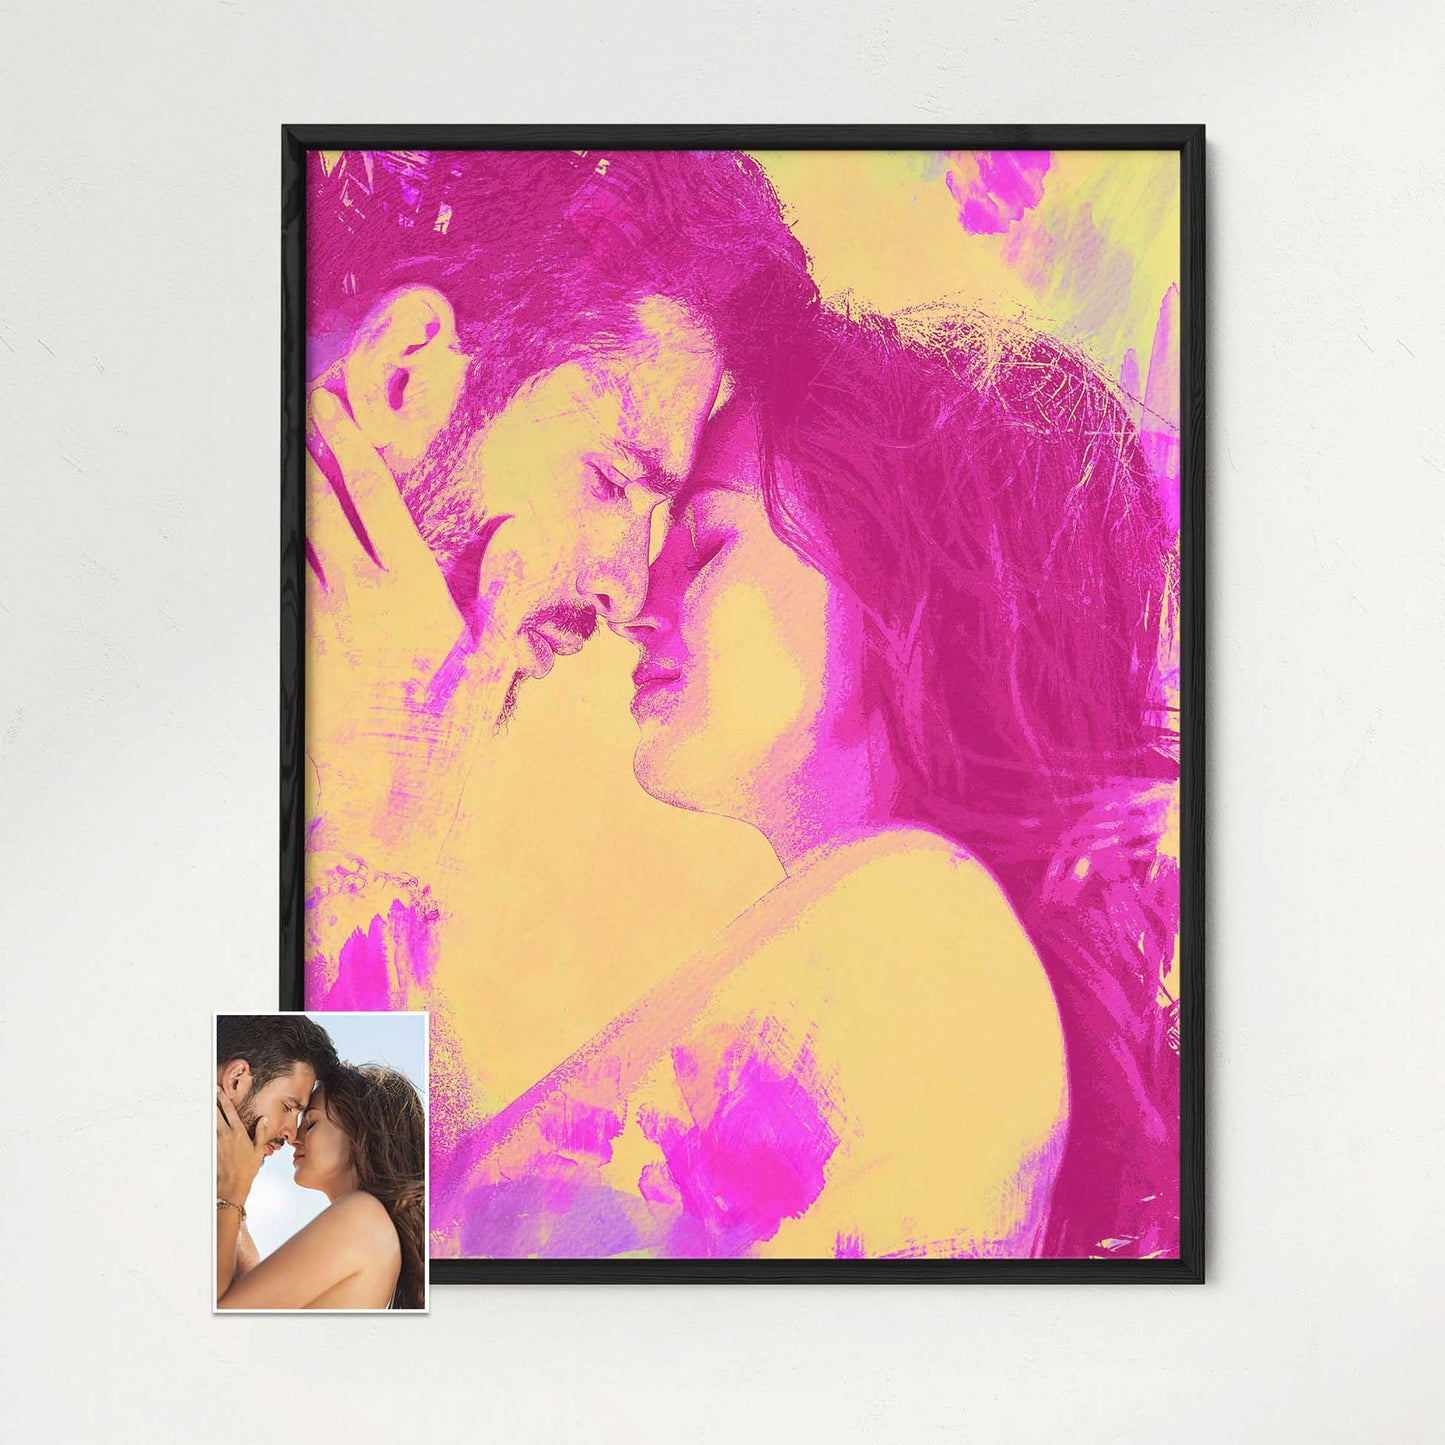 Immerse your space in the delightful charm of our Personalised Pink & Yellow Watercolor Framed Print. This gallery-quality artwork, created from a photo, showcases an original, unique painting bursting with cool, vibrant hues